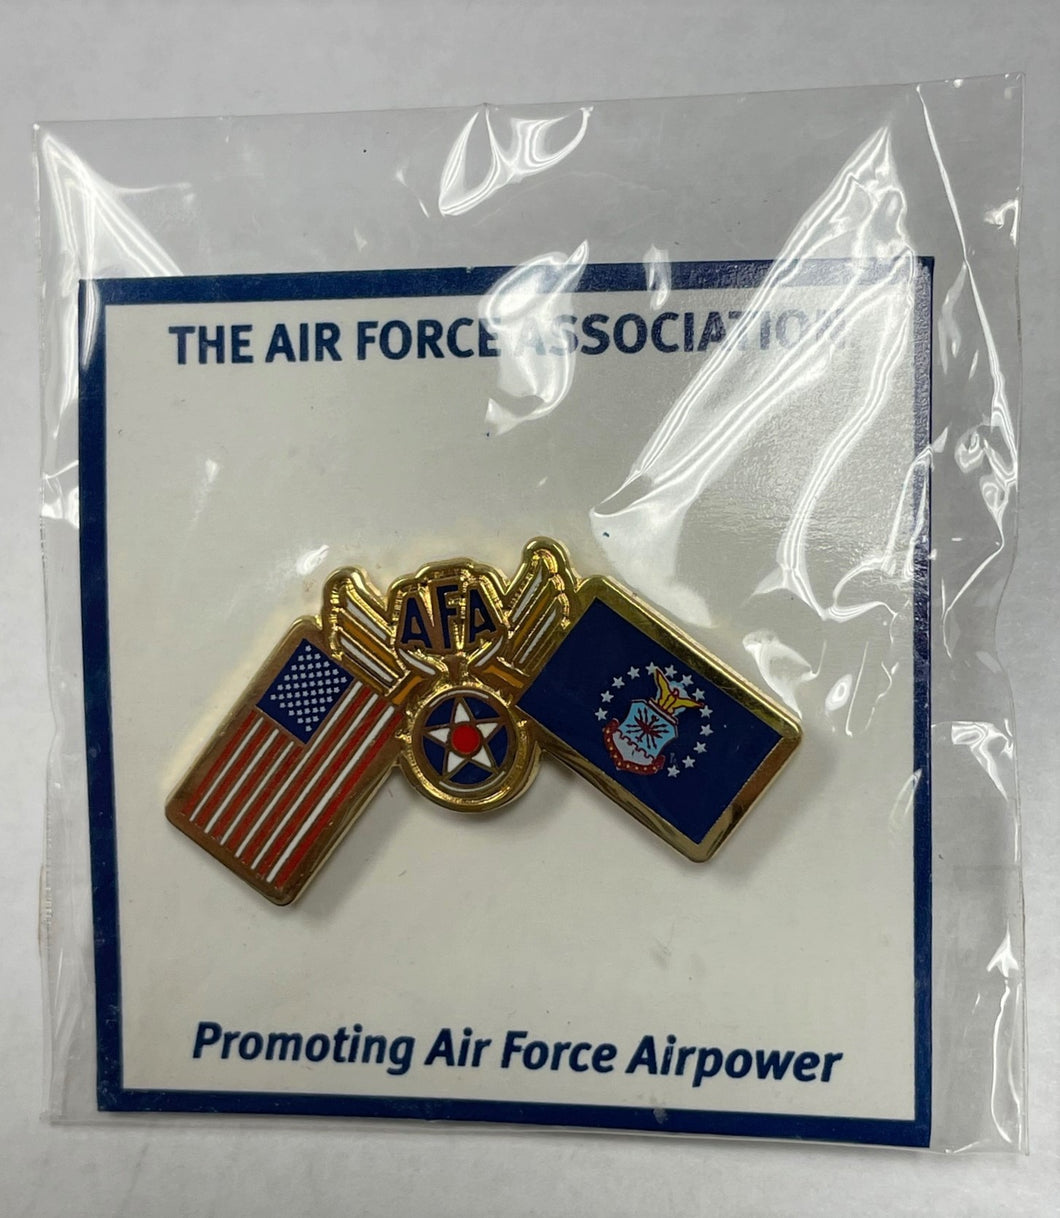 AFA Air Force Association Pin - Promoting Air Force Airpower - New